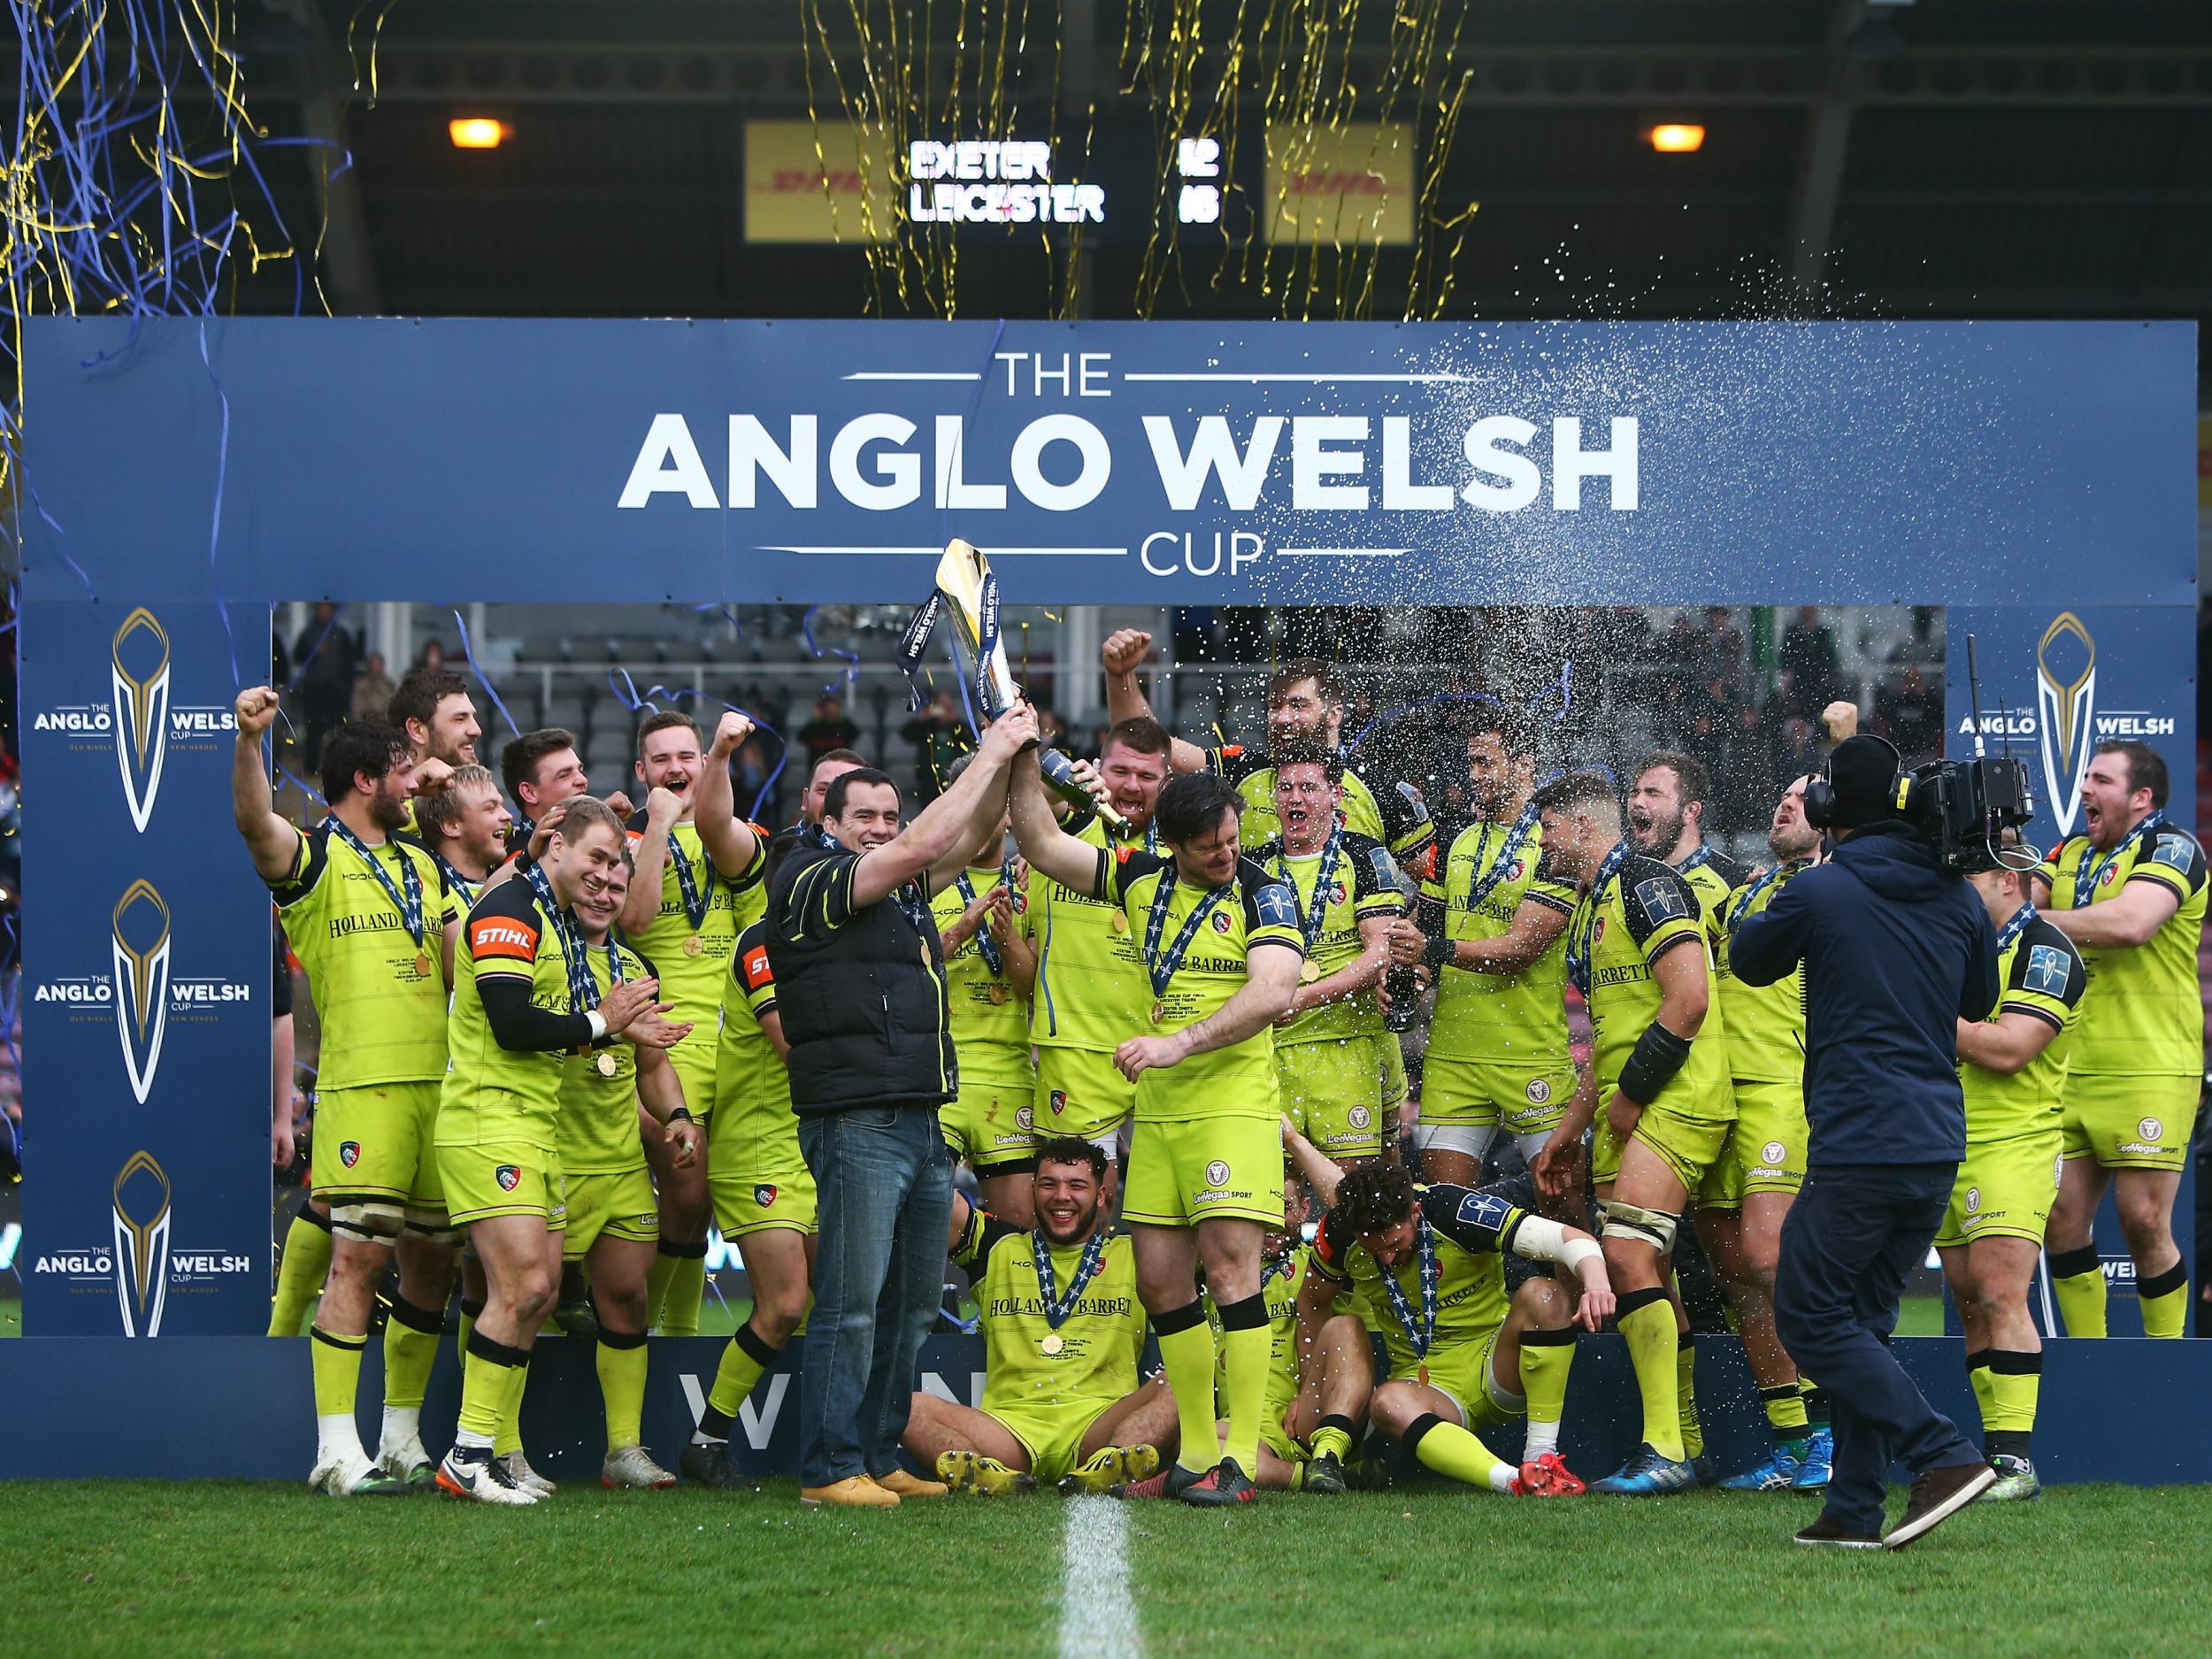 American and South African sides could join the Anglo-Welsh Cup as early as 2019